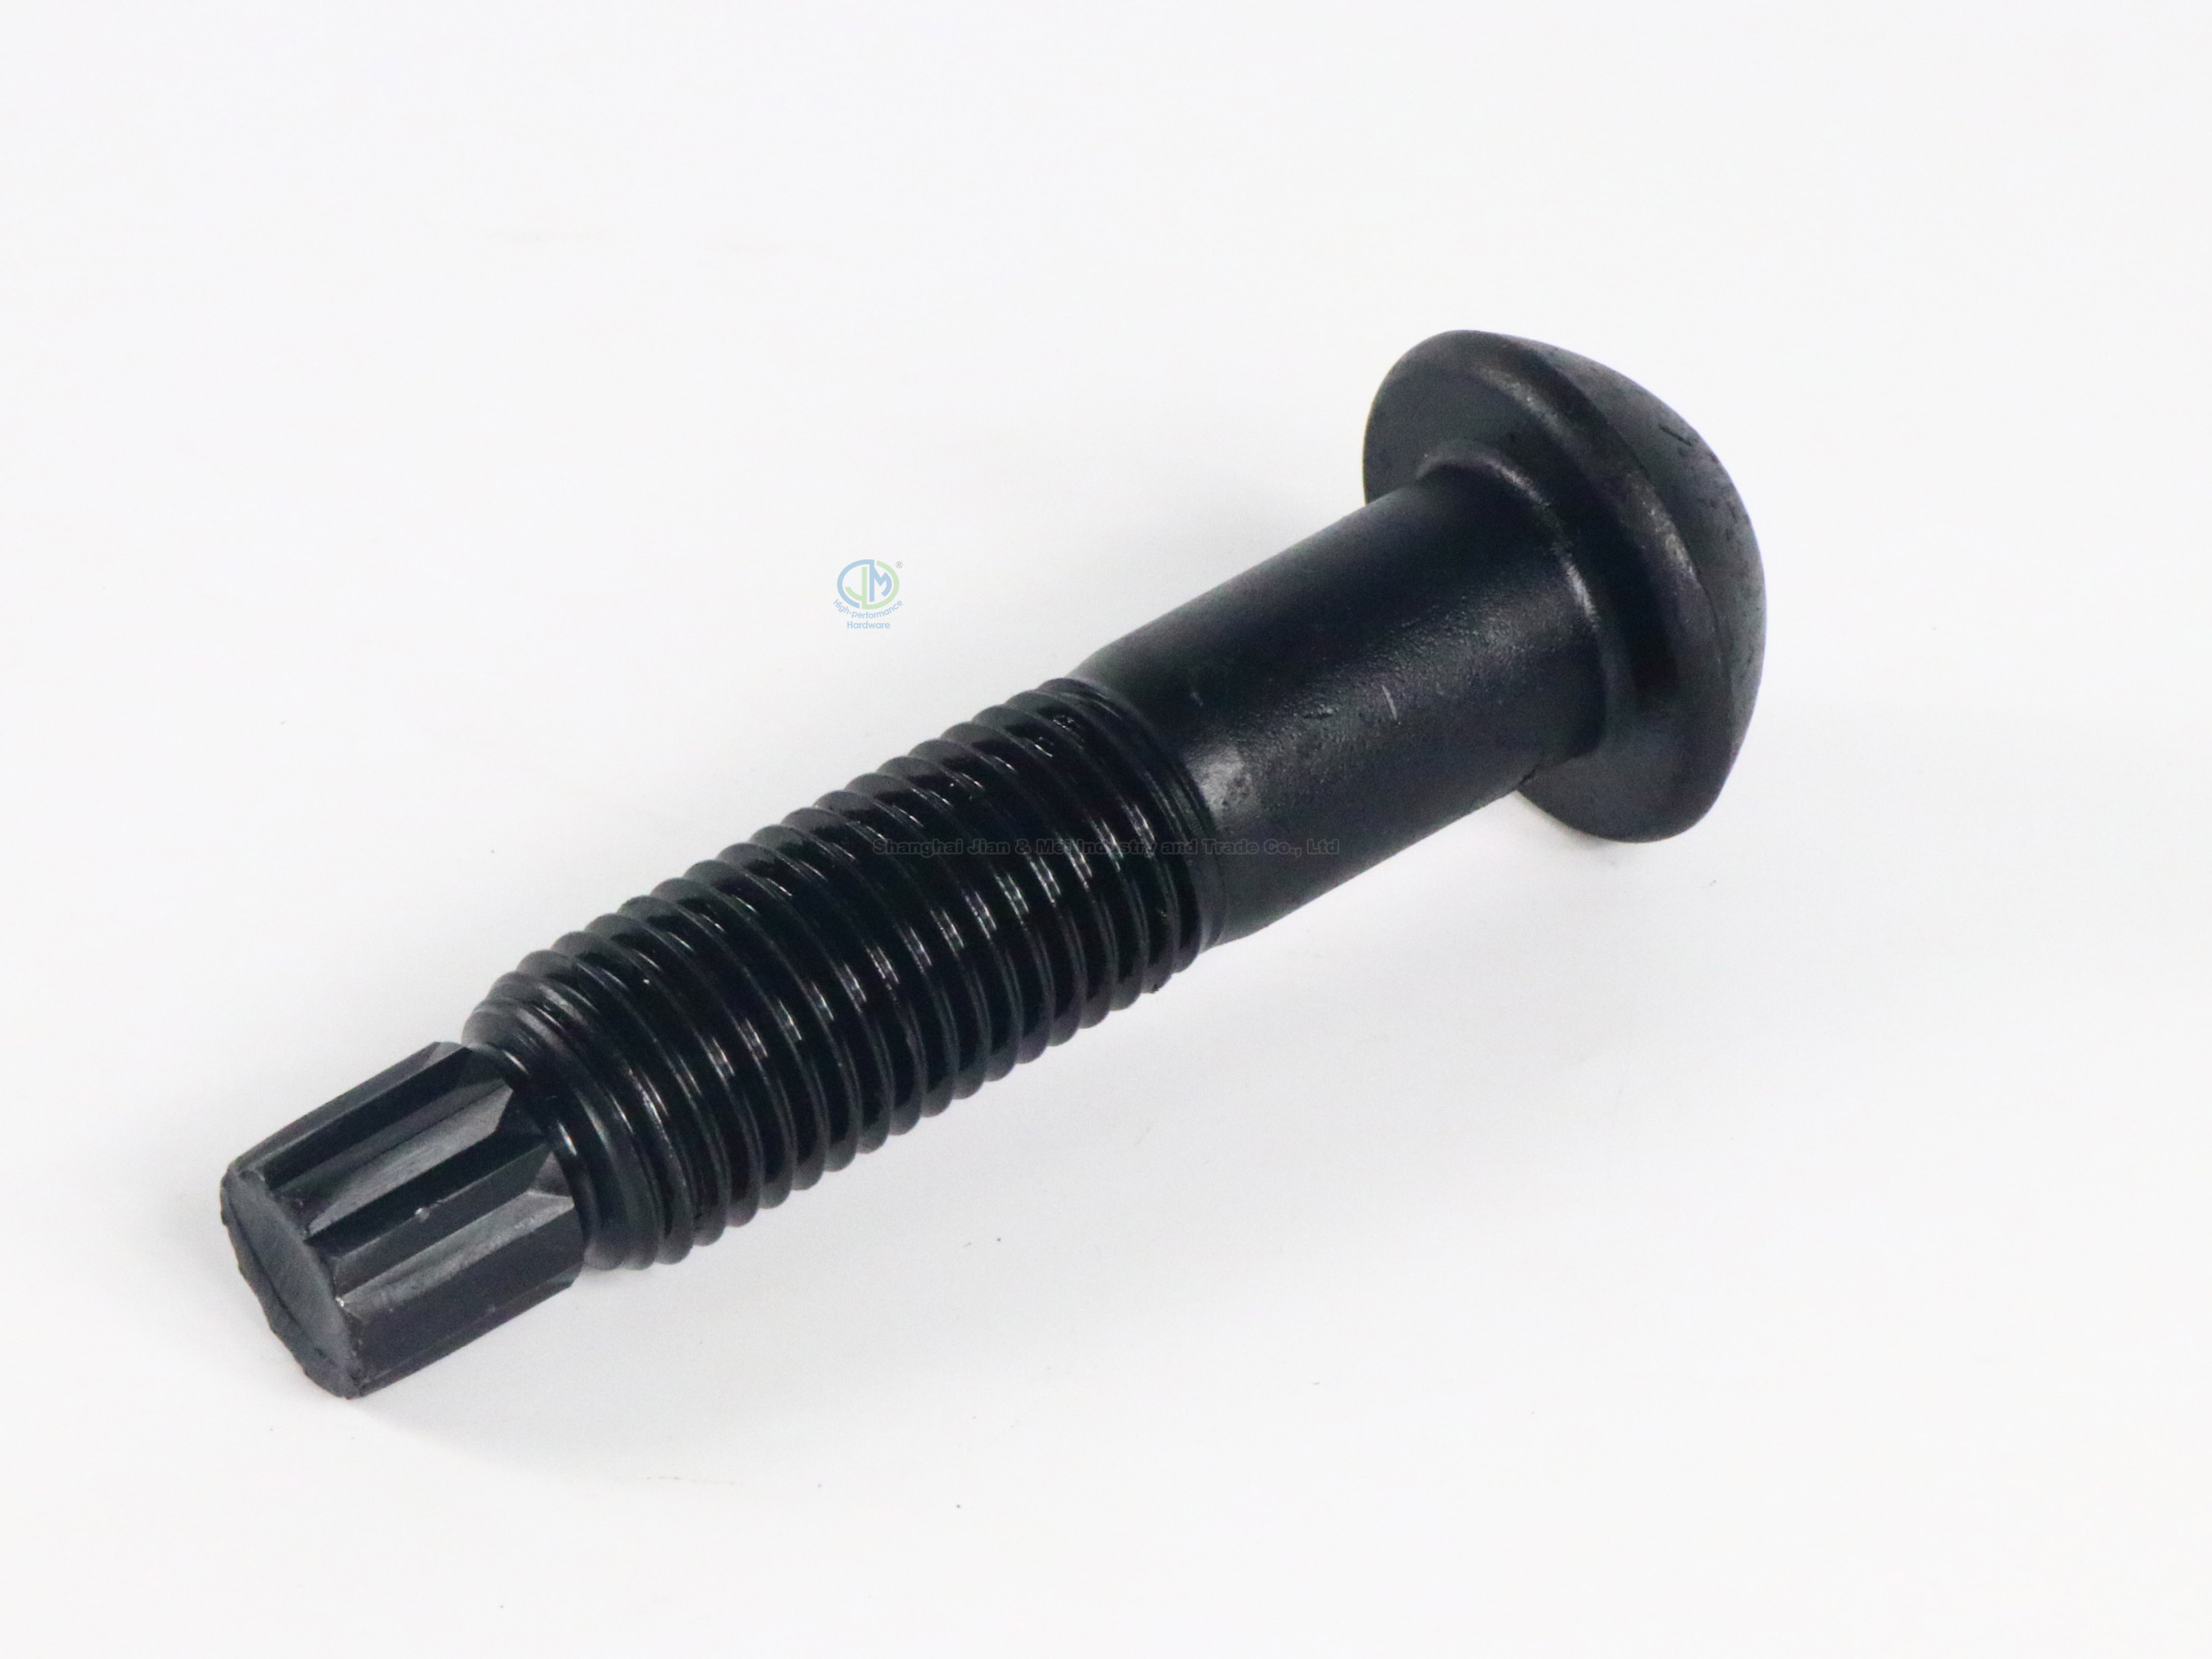 Tension Control Structural Bolt